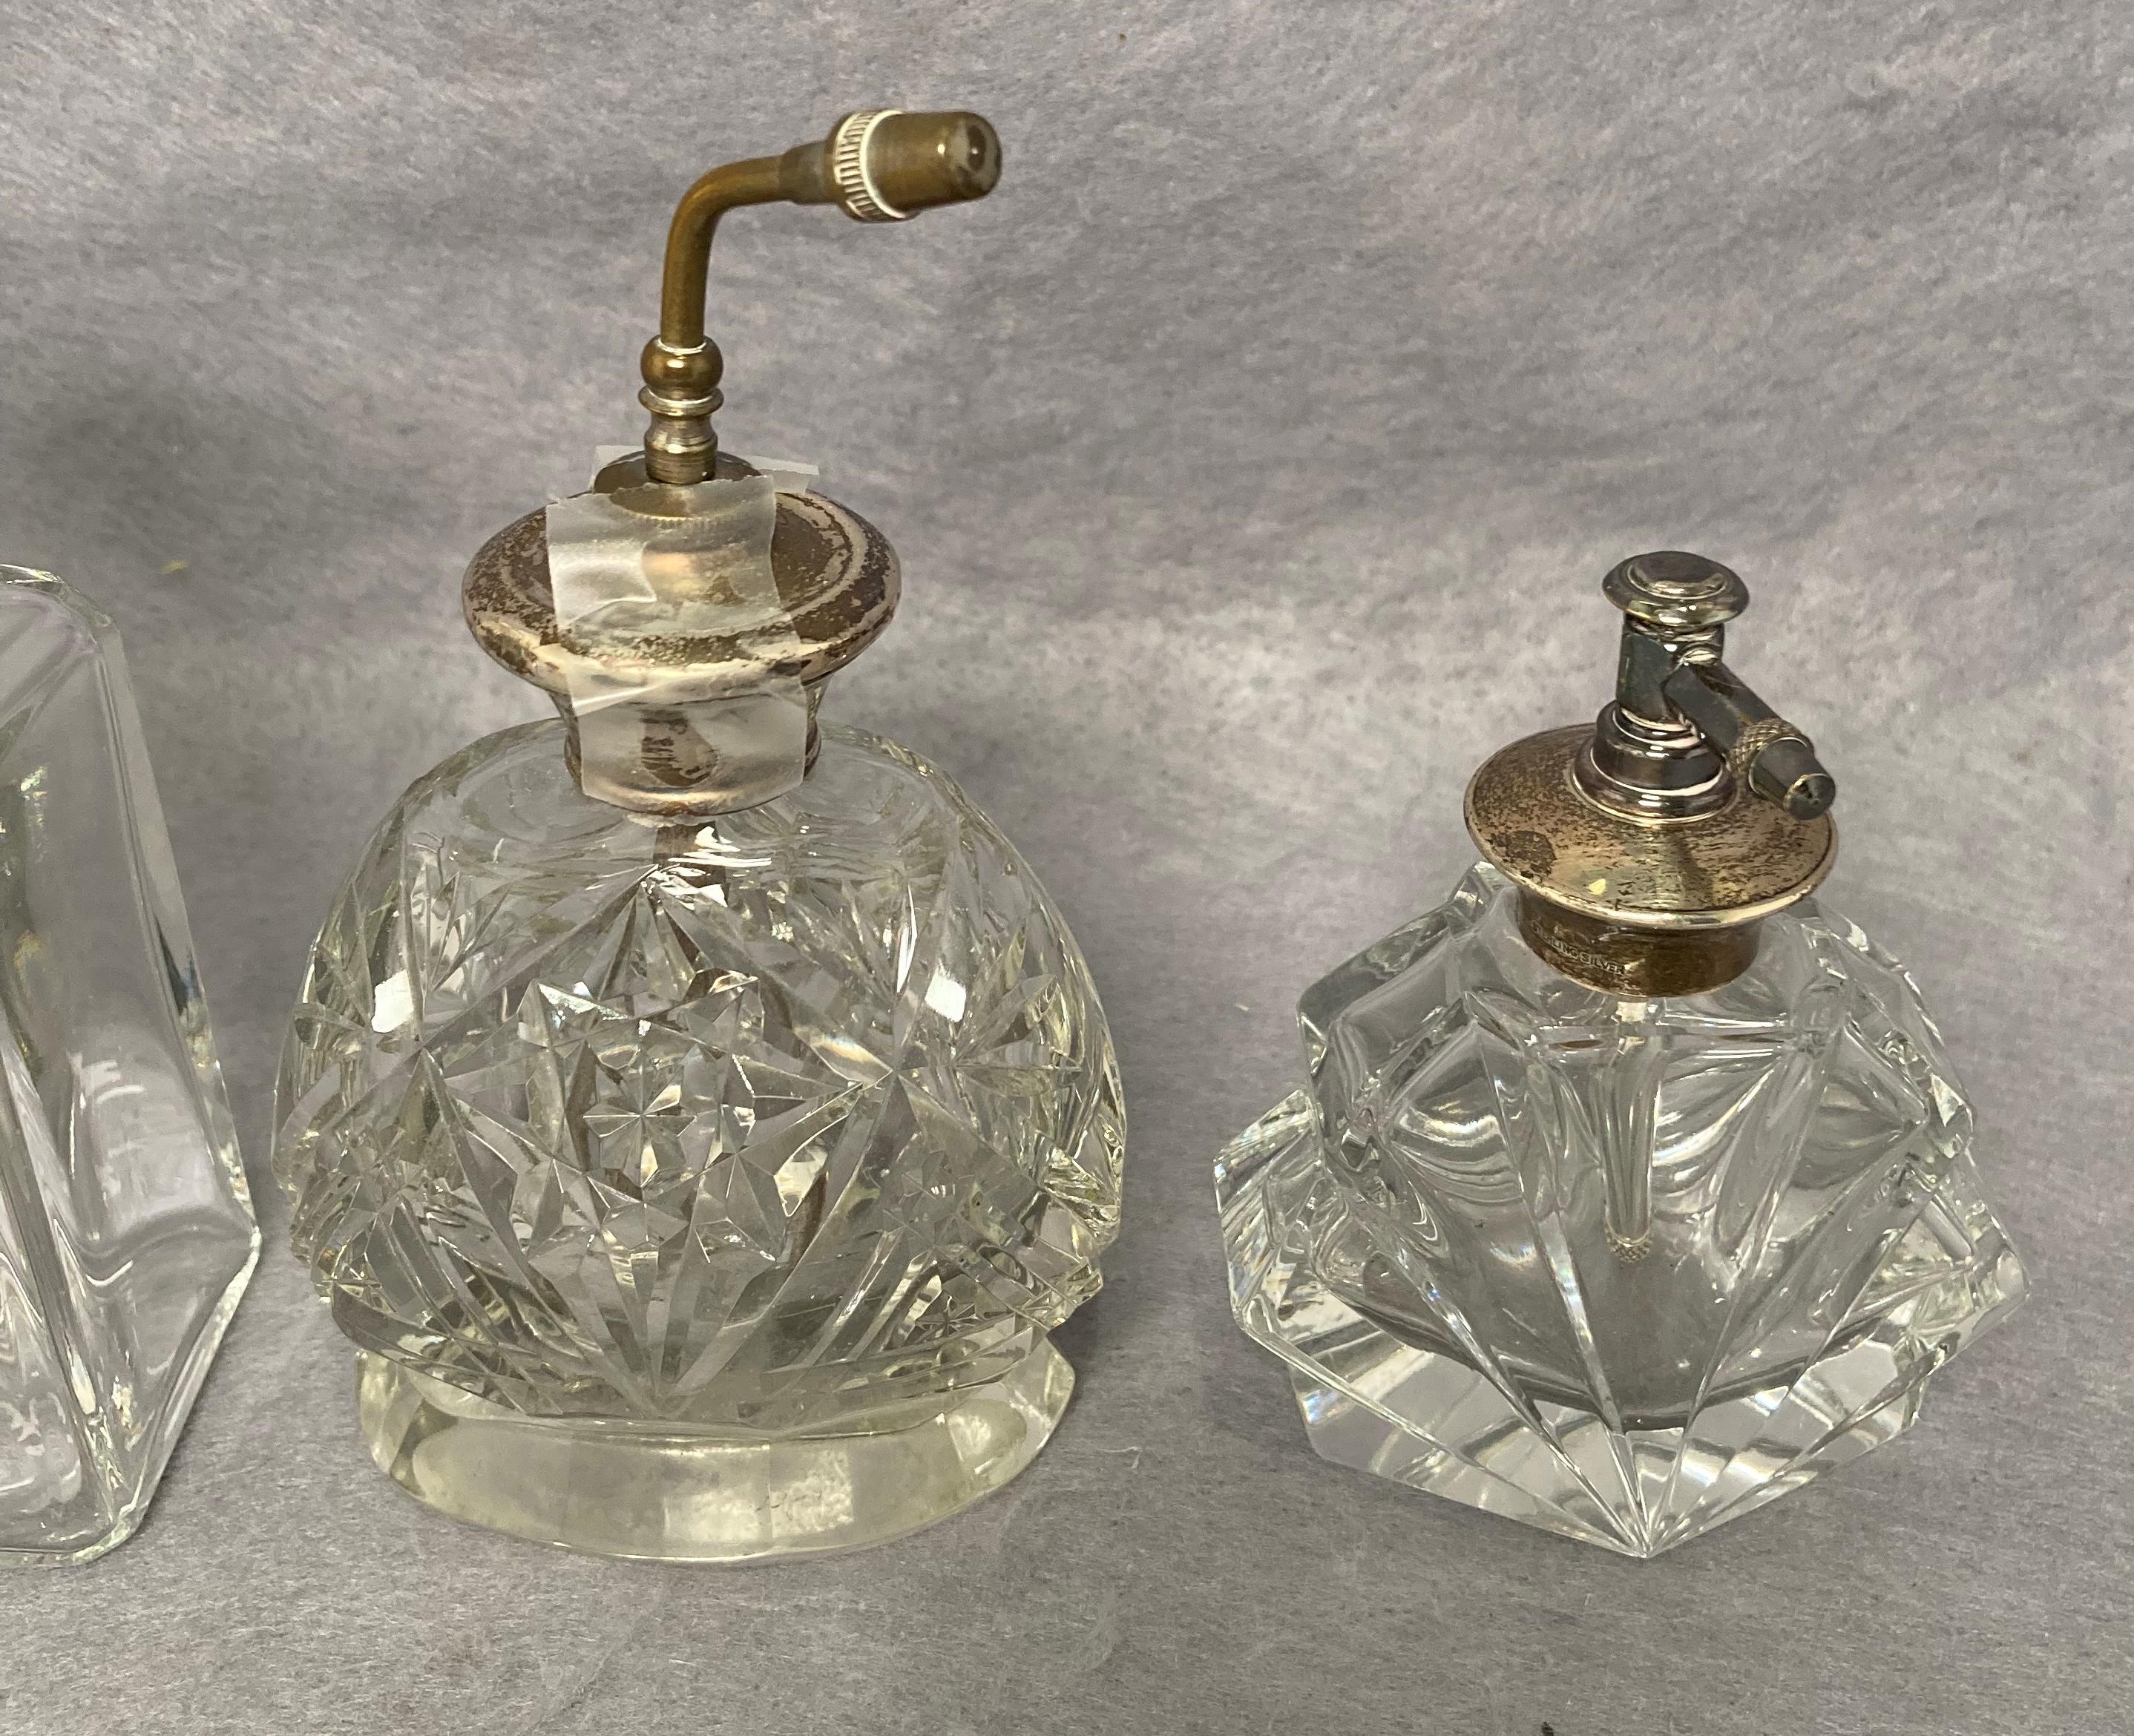 Two vintage perfume crystal/glass bottles with Sterling Silver tops/pumps (9cm and 14cm high) and a - Image 3 of 5